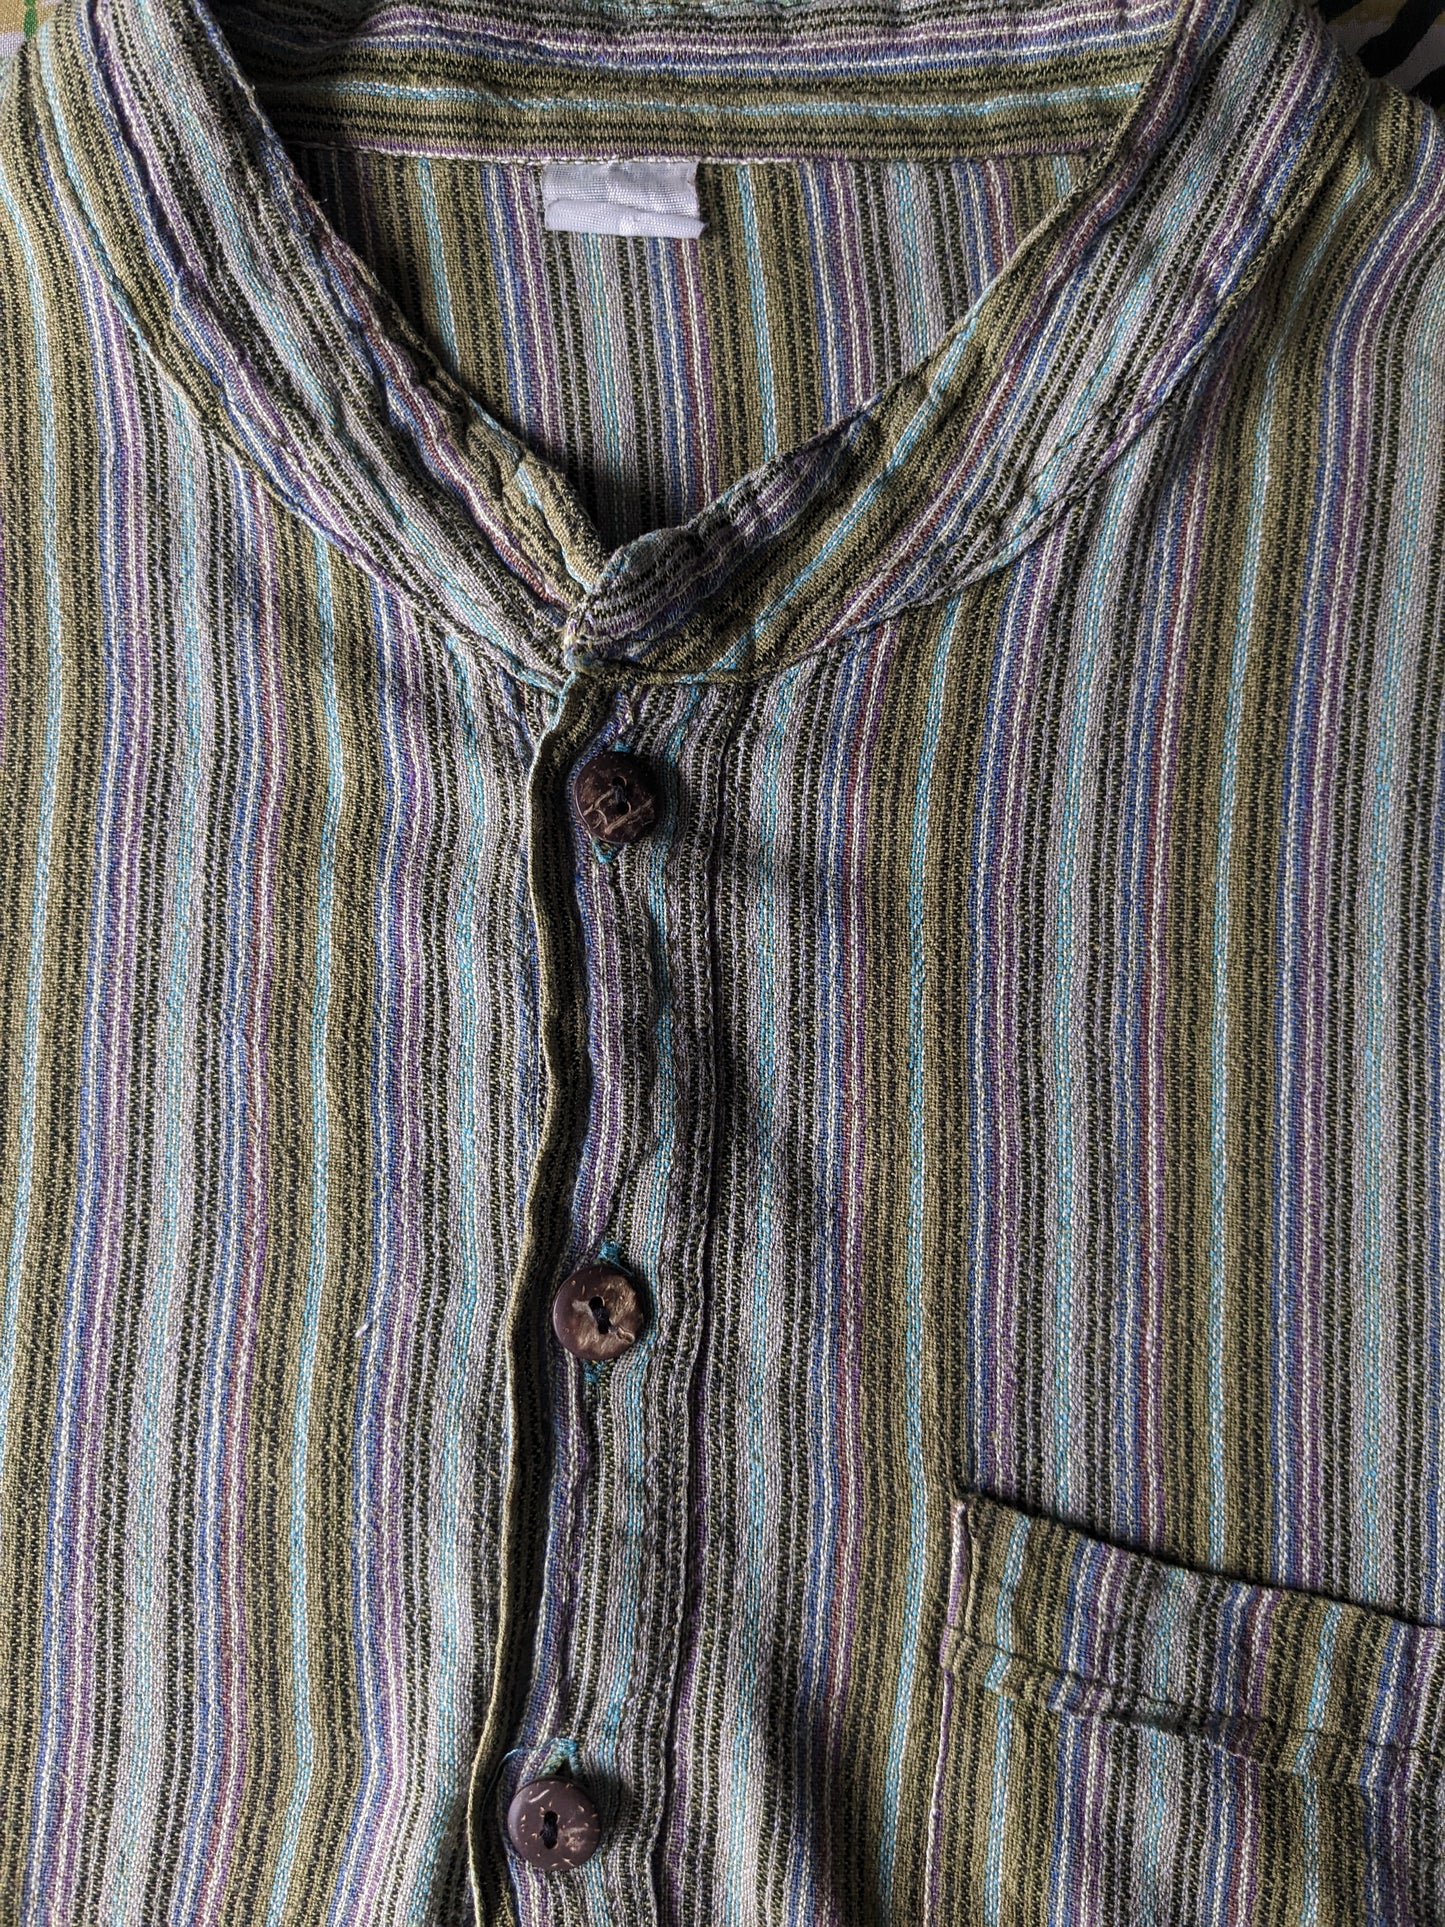 Vintage polo sweater / shirt with raised / farmers / mao collar. Green purple brown blue striped with bag. Size XL.